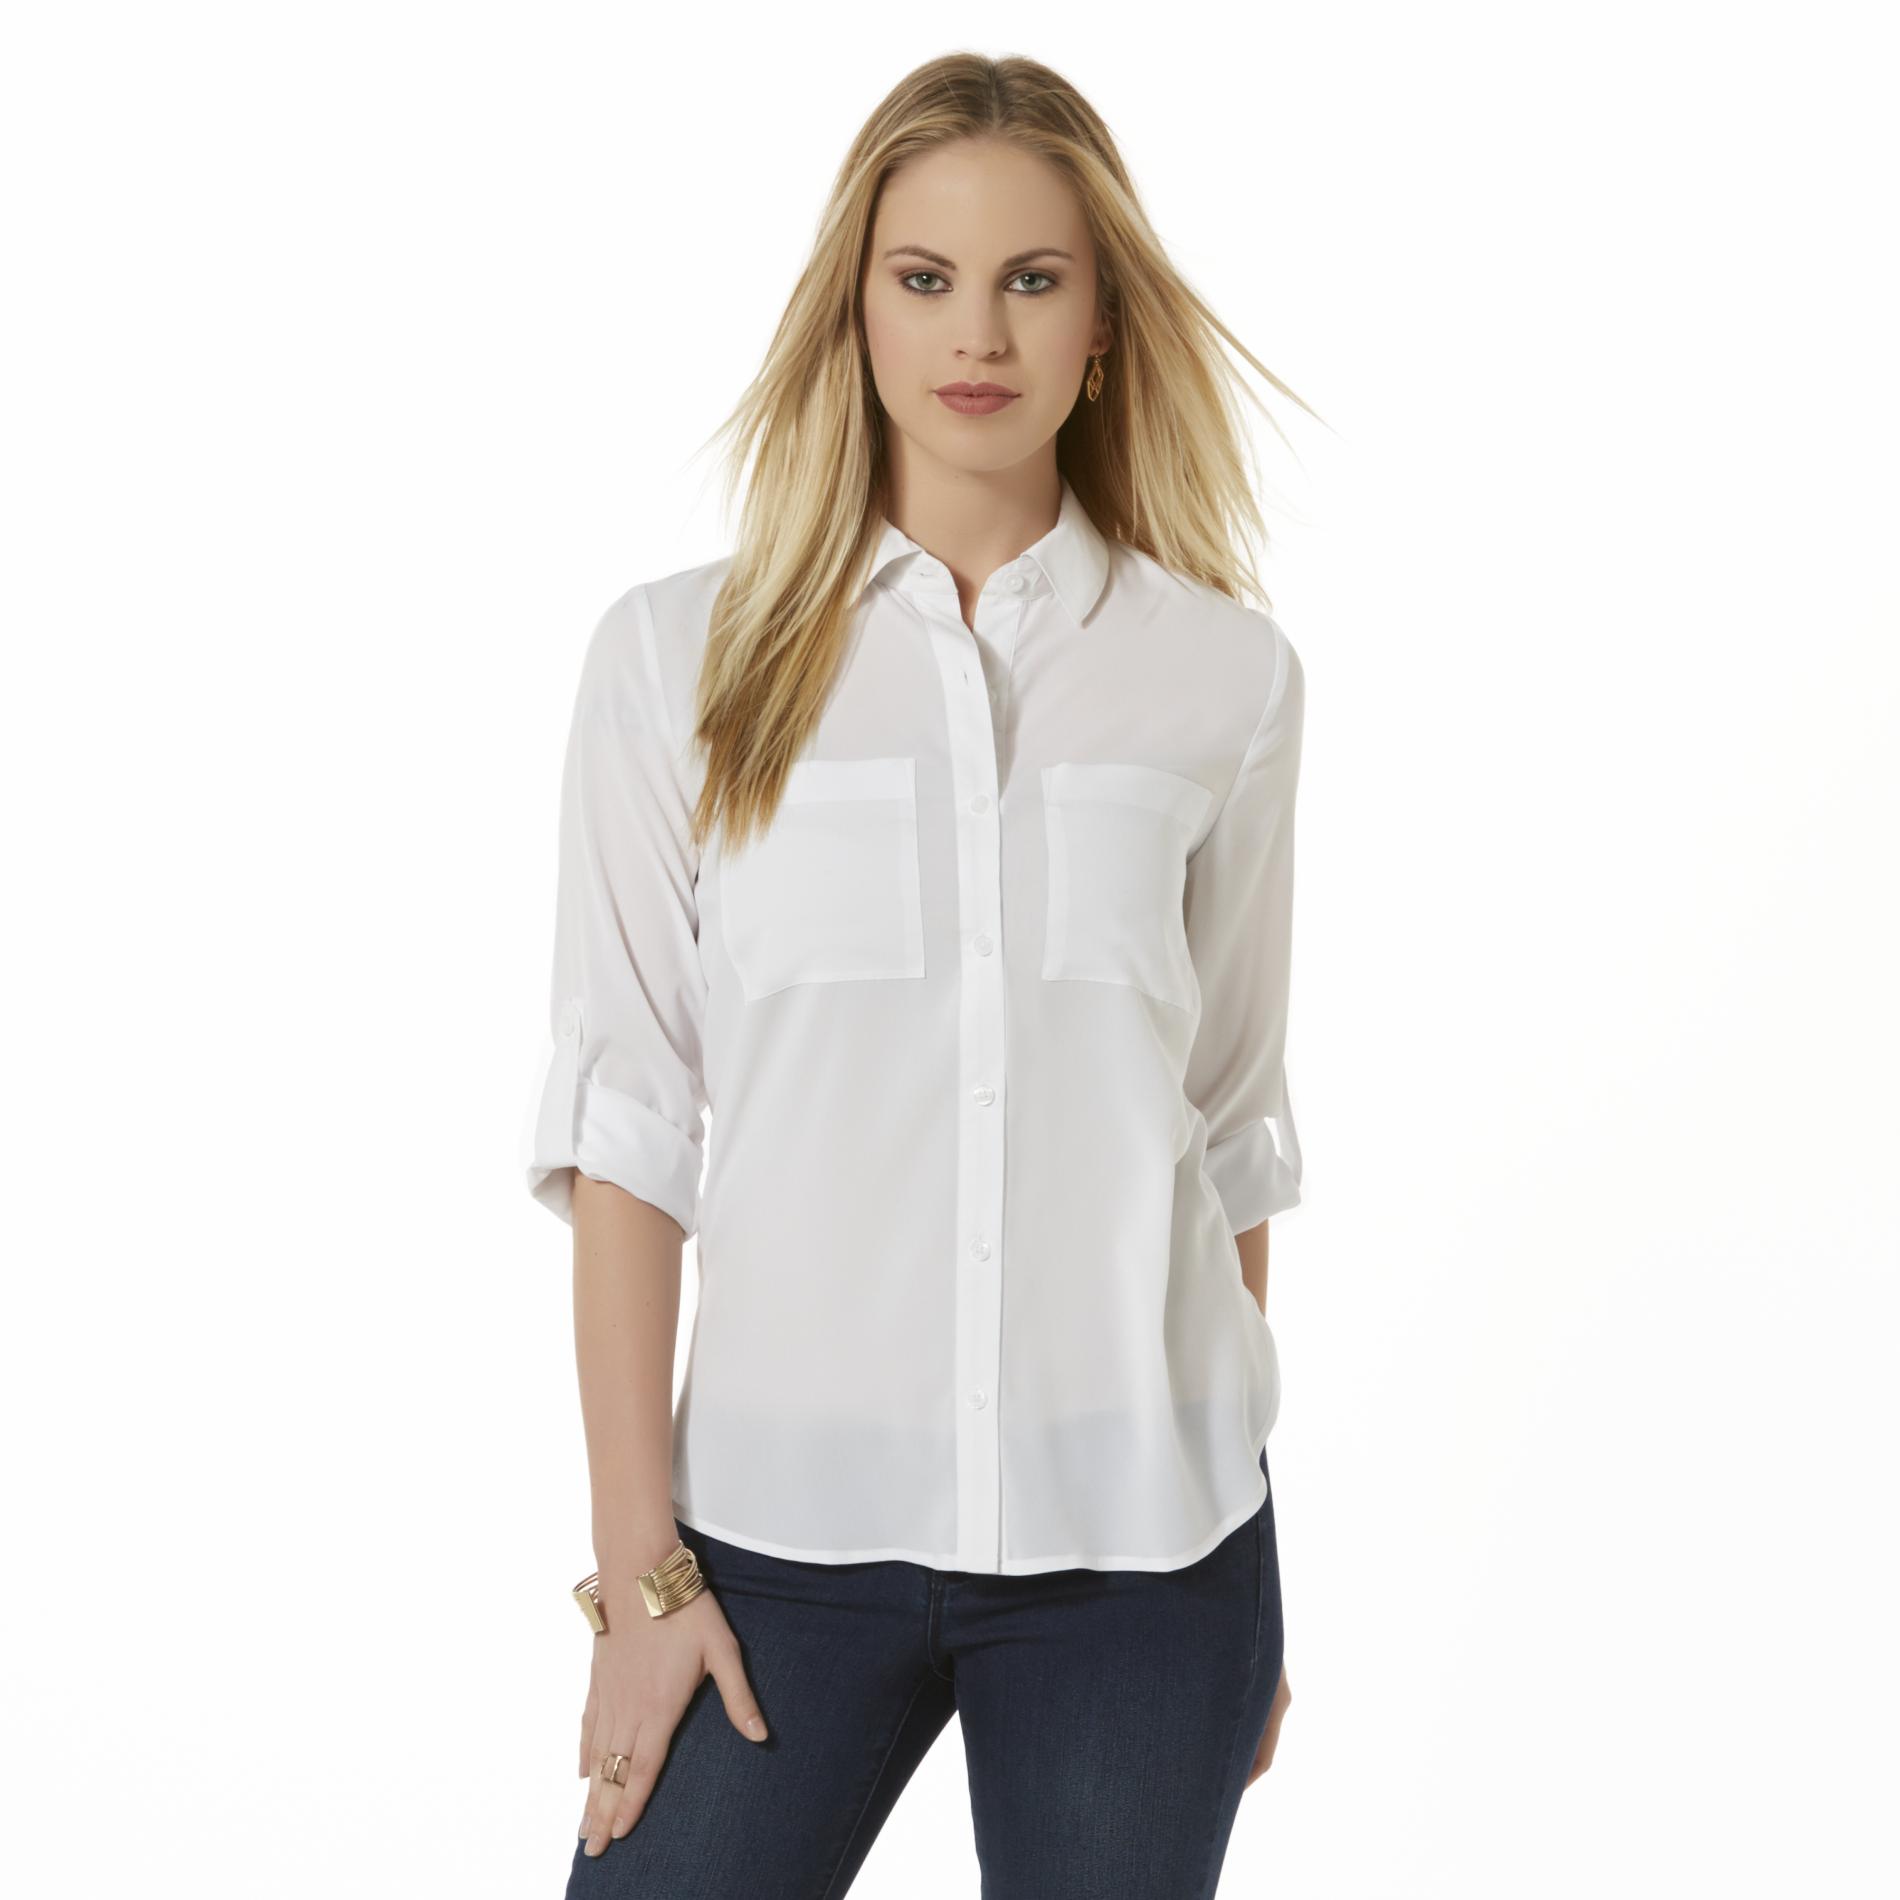 Attention Women's Utility Top - Clothing - Women's Clothing - Women's Tops